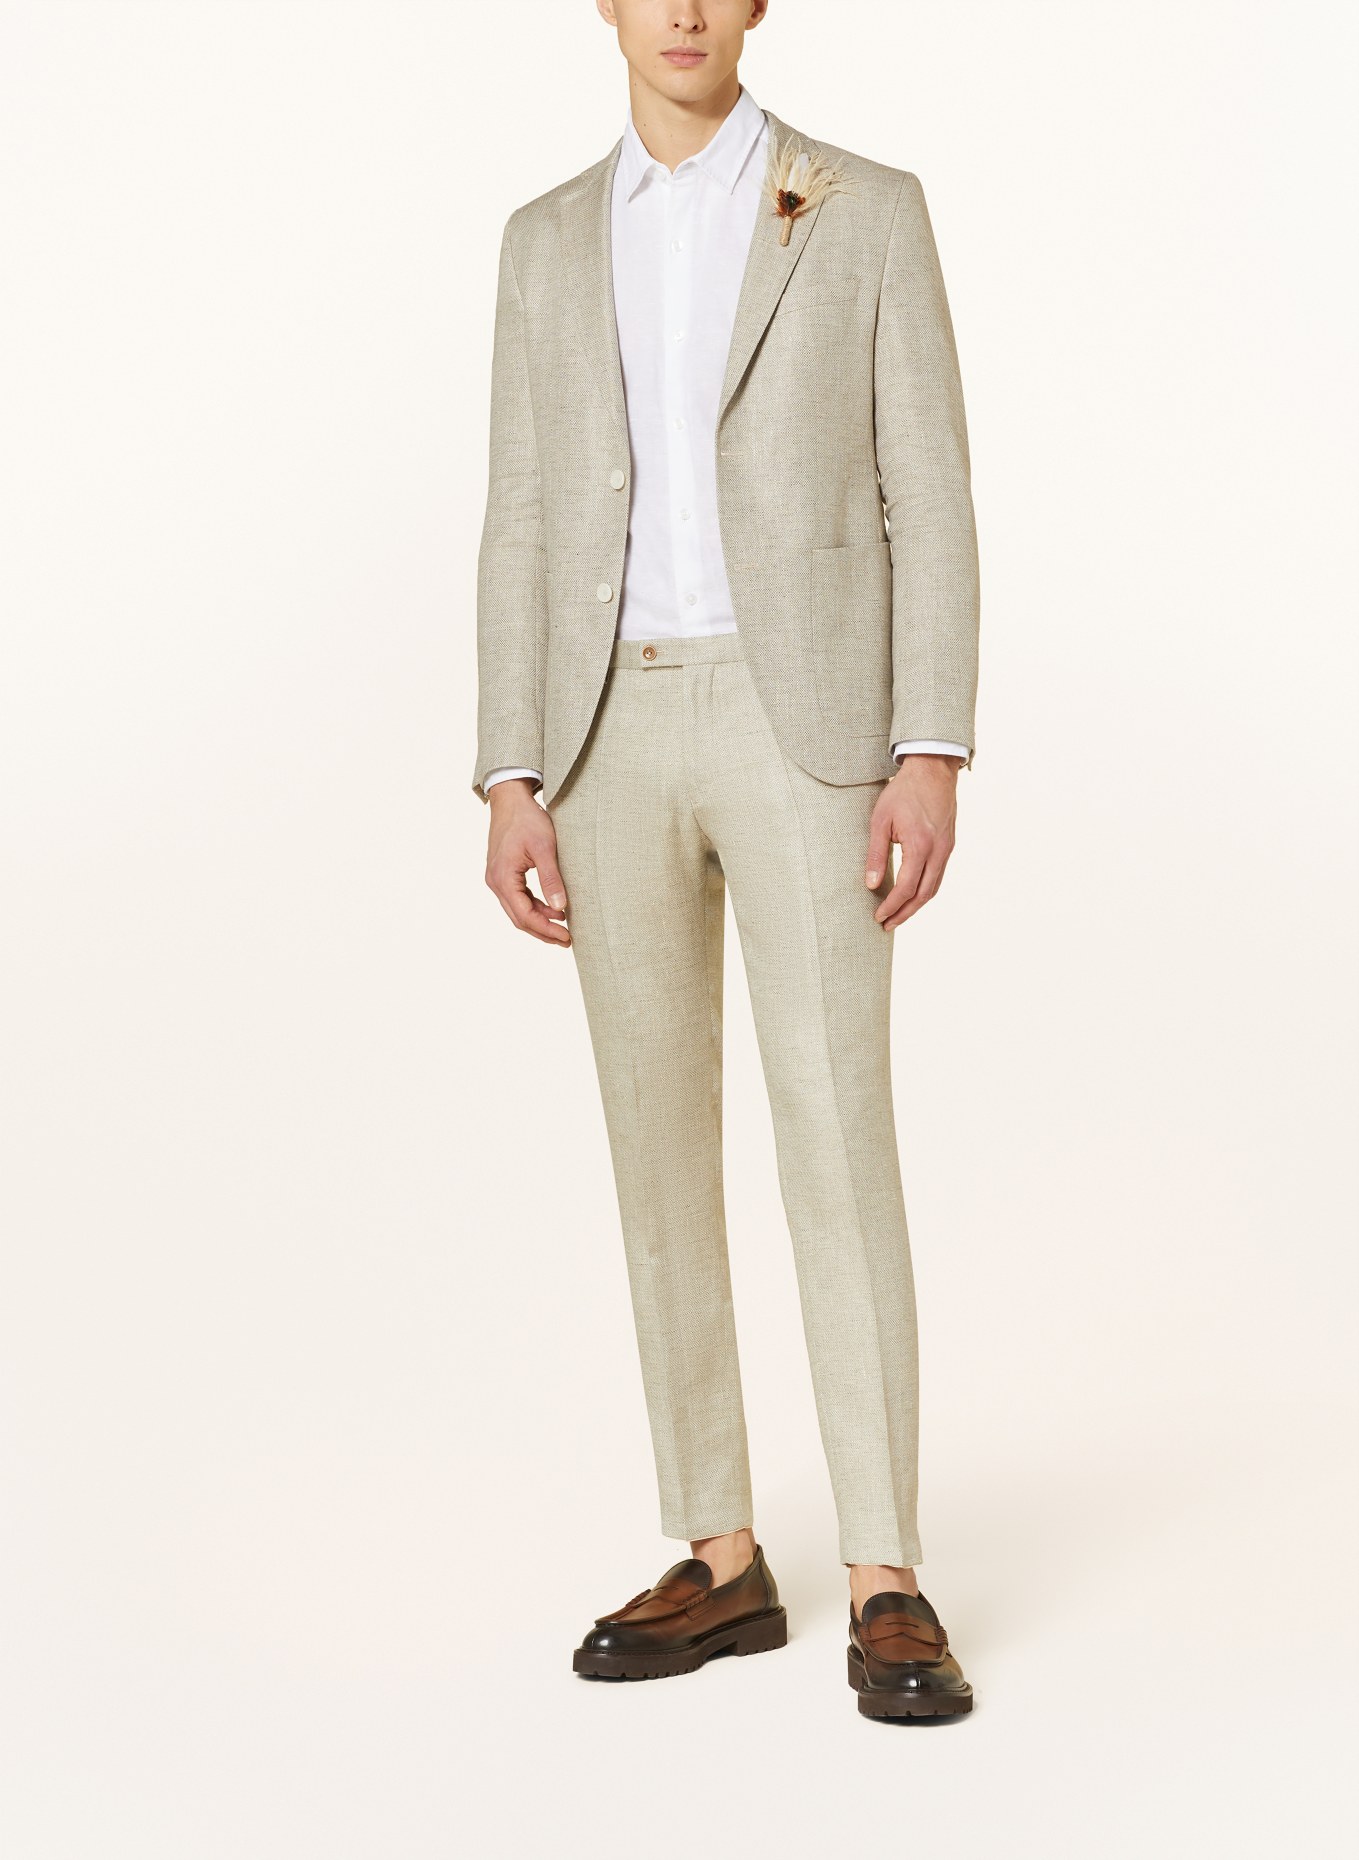 CG - CLUB of GENTS Suit jacket SG PETERSON slim fit with linen, Color: 21 HELLBEIGE (Image 3)